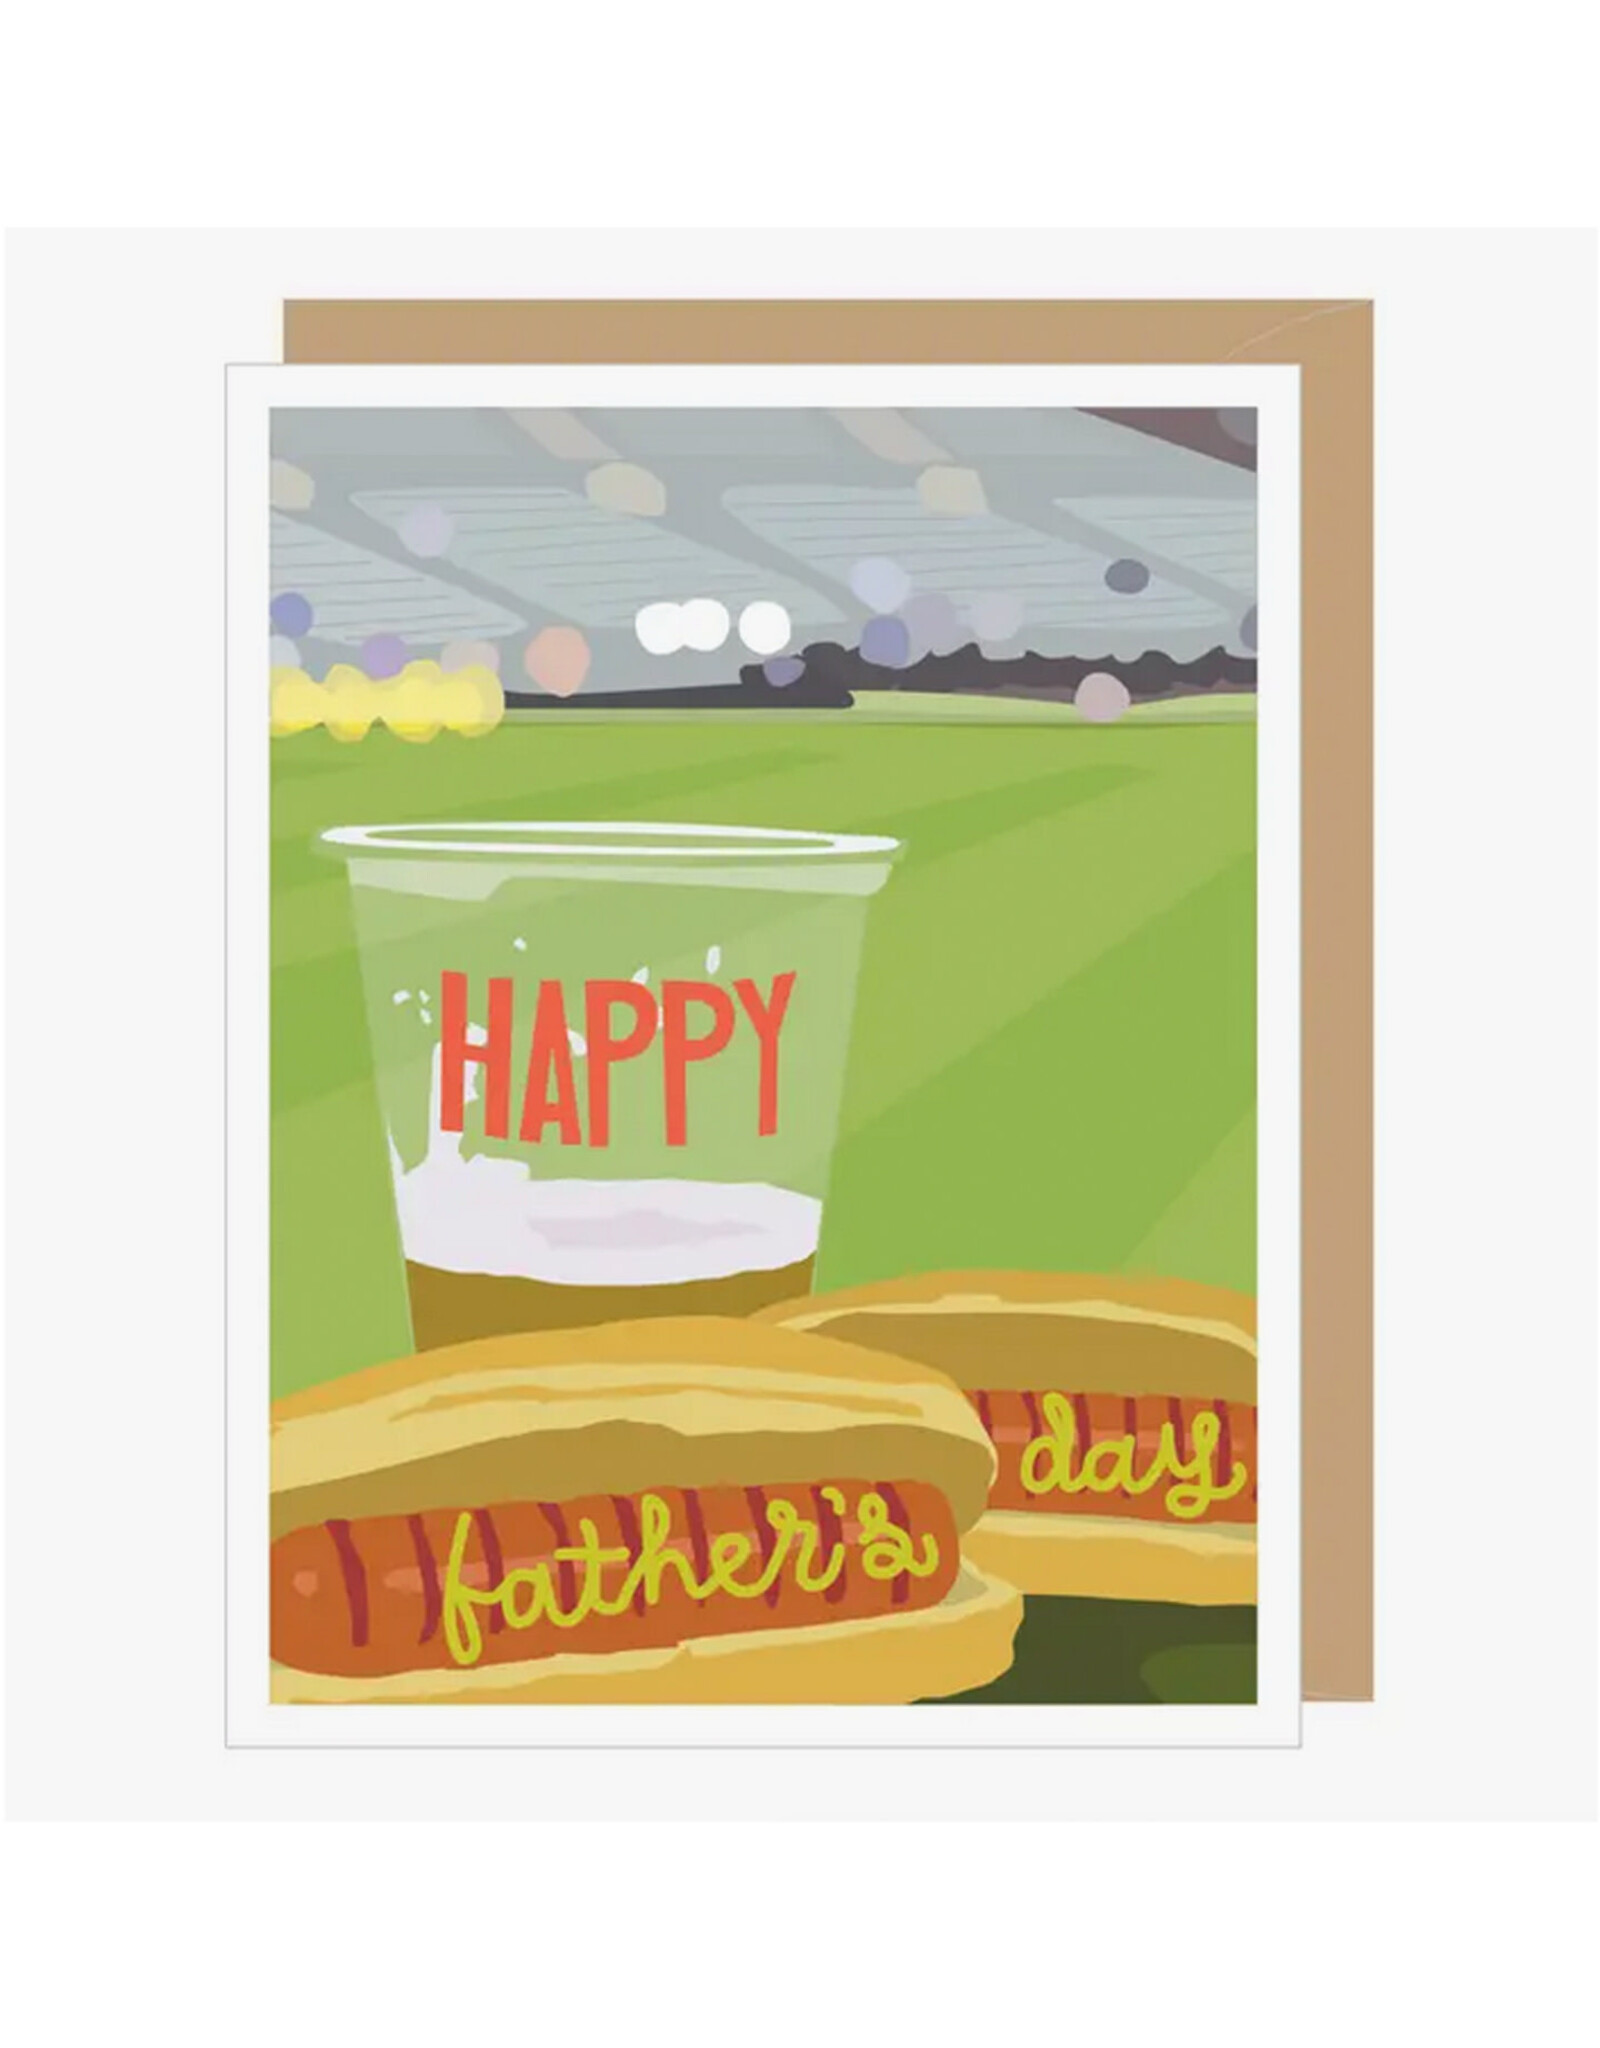 Beer and Hot Dogs Father's Day Card